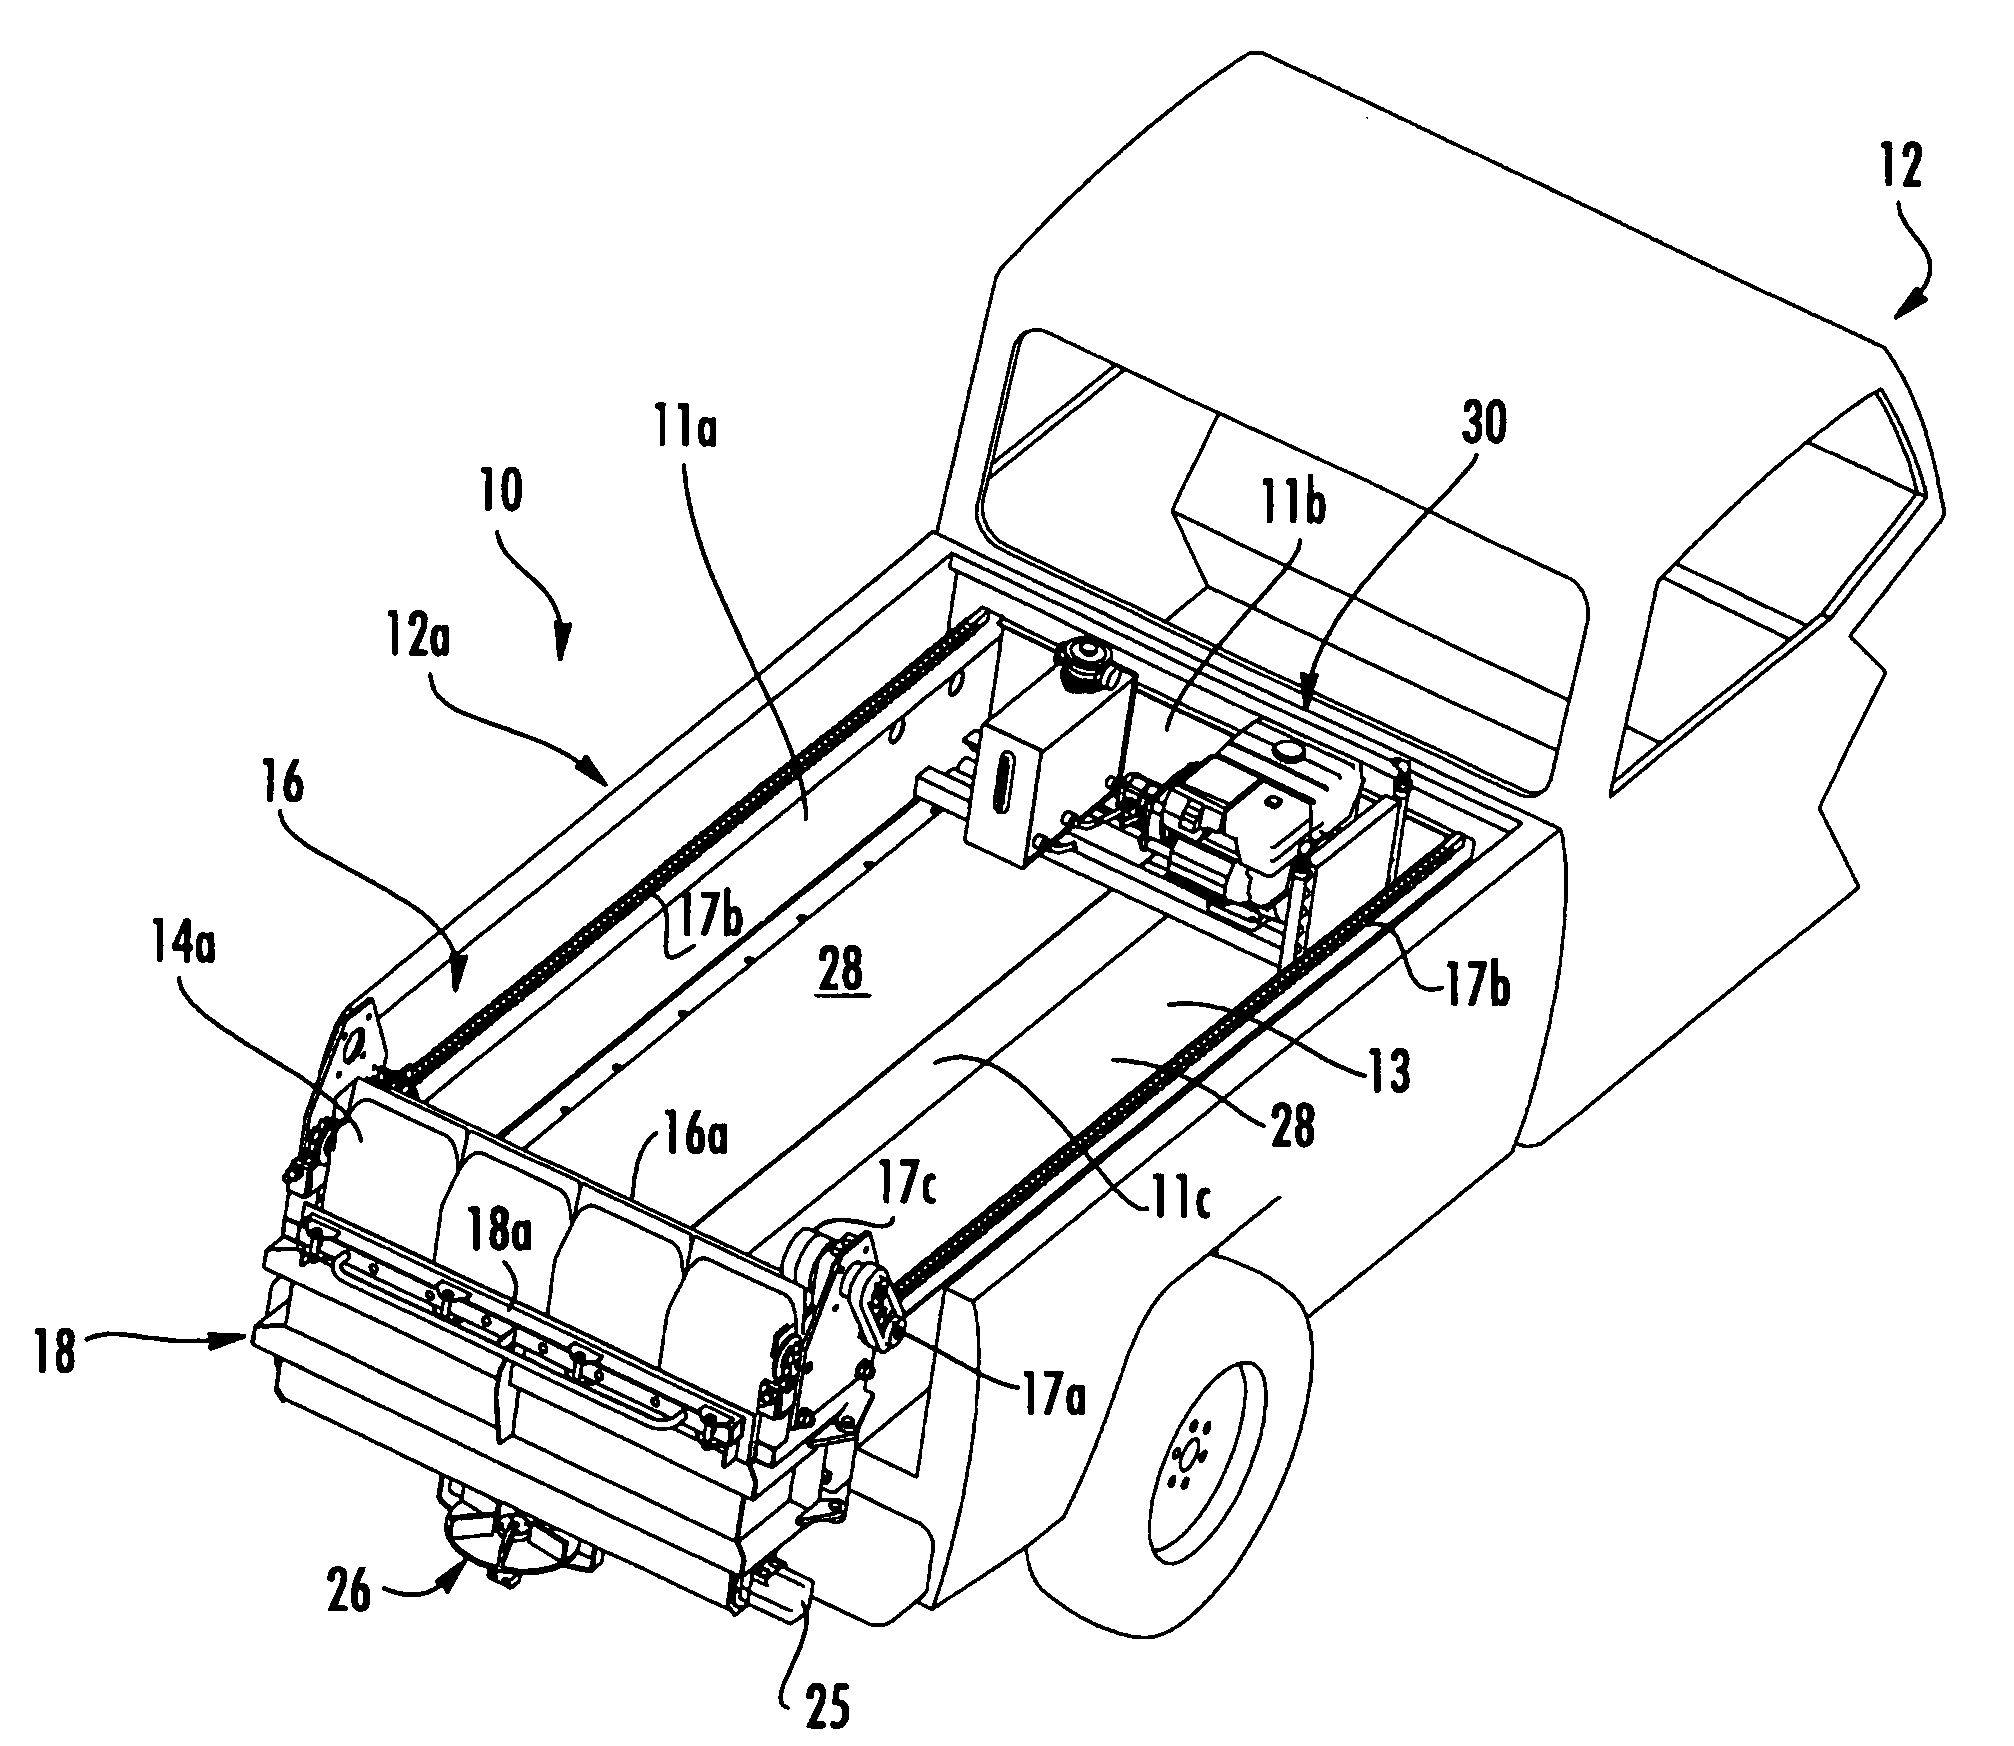 Material spreading device